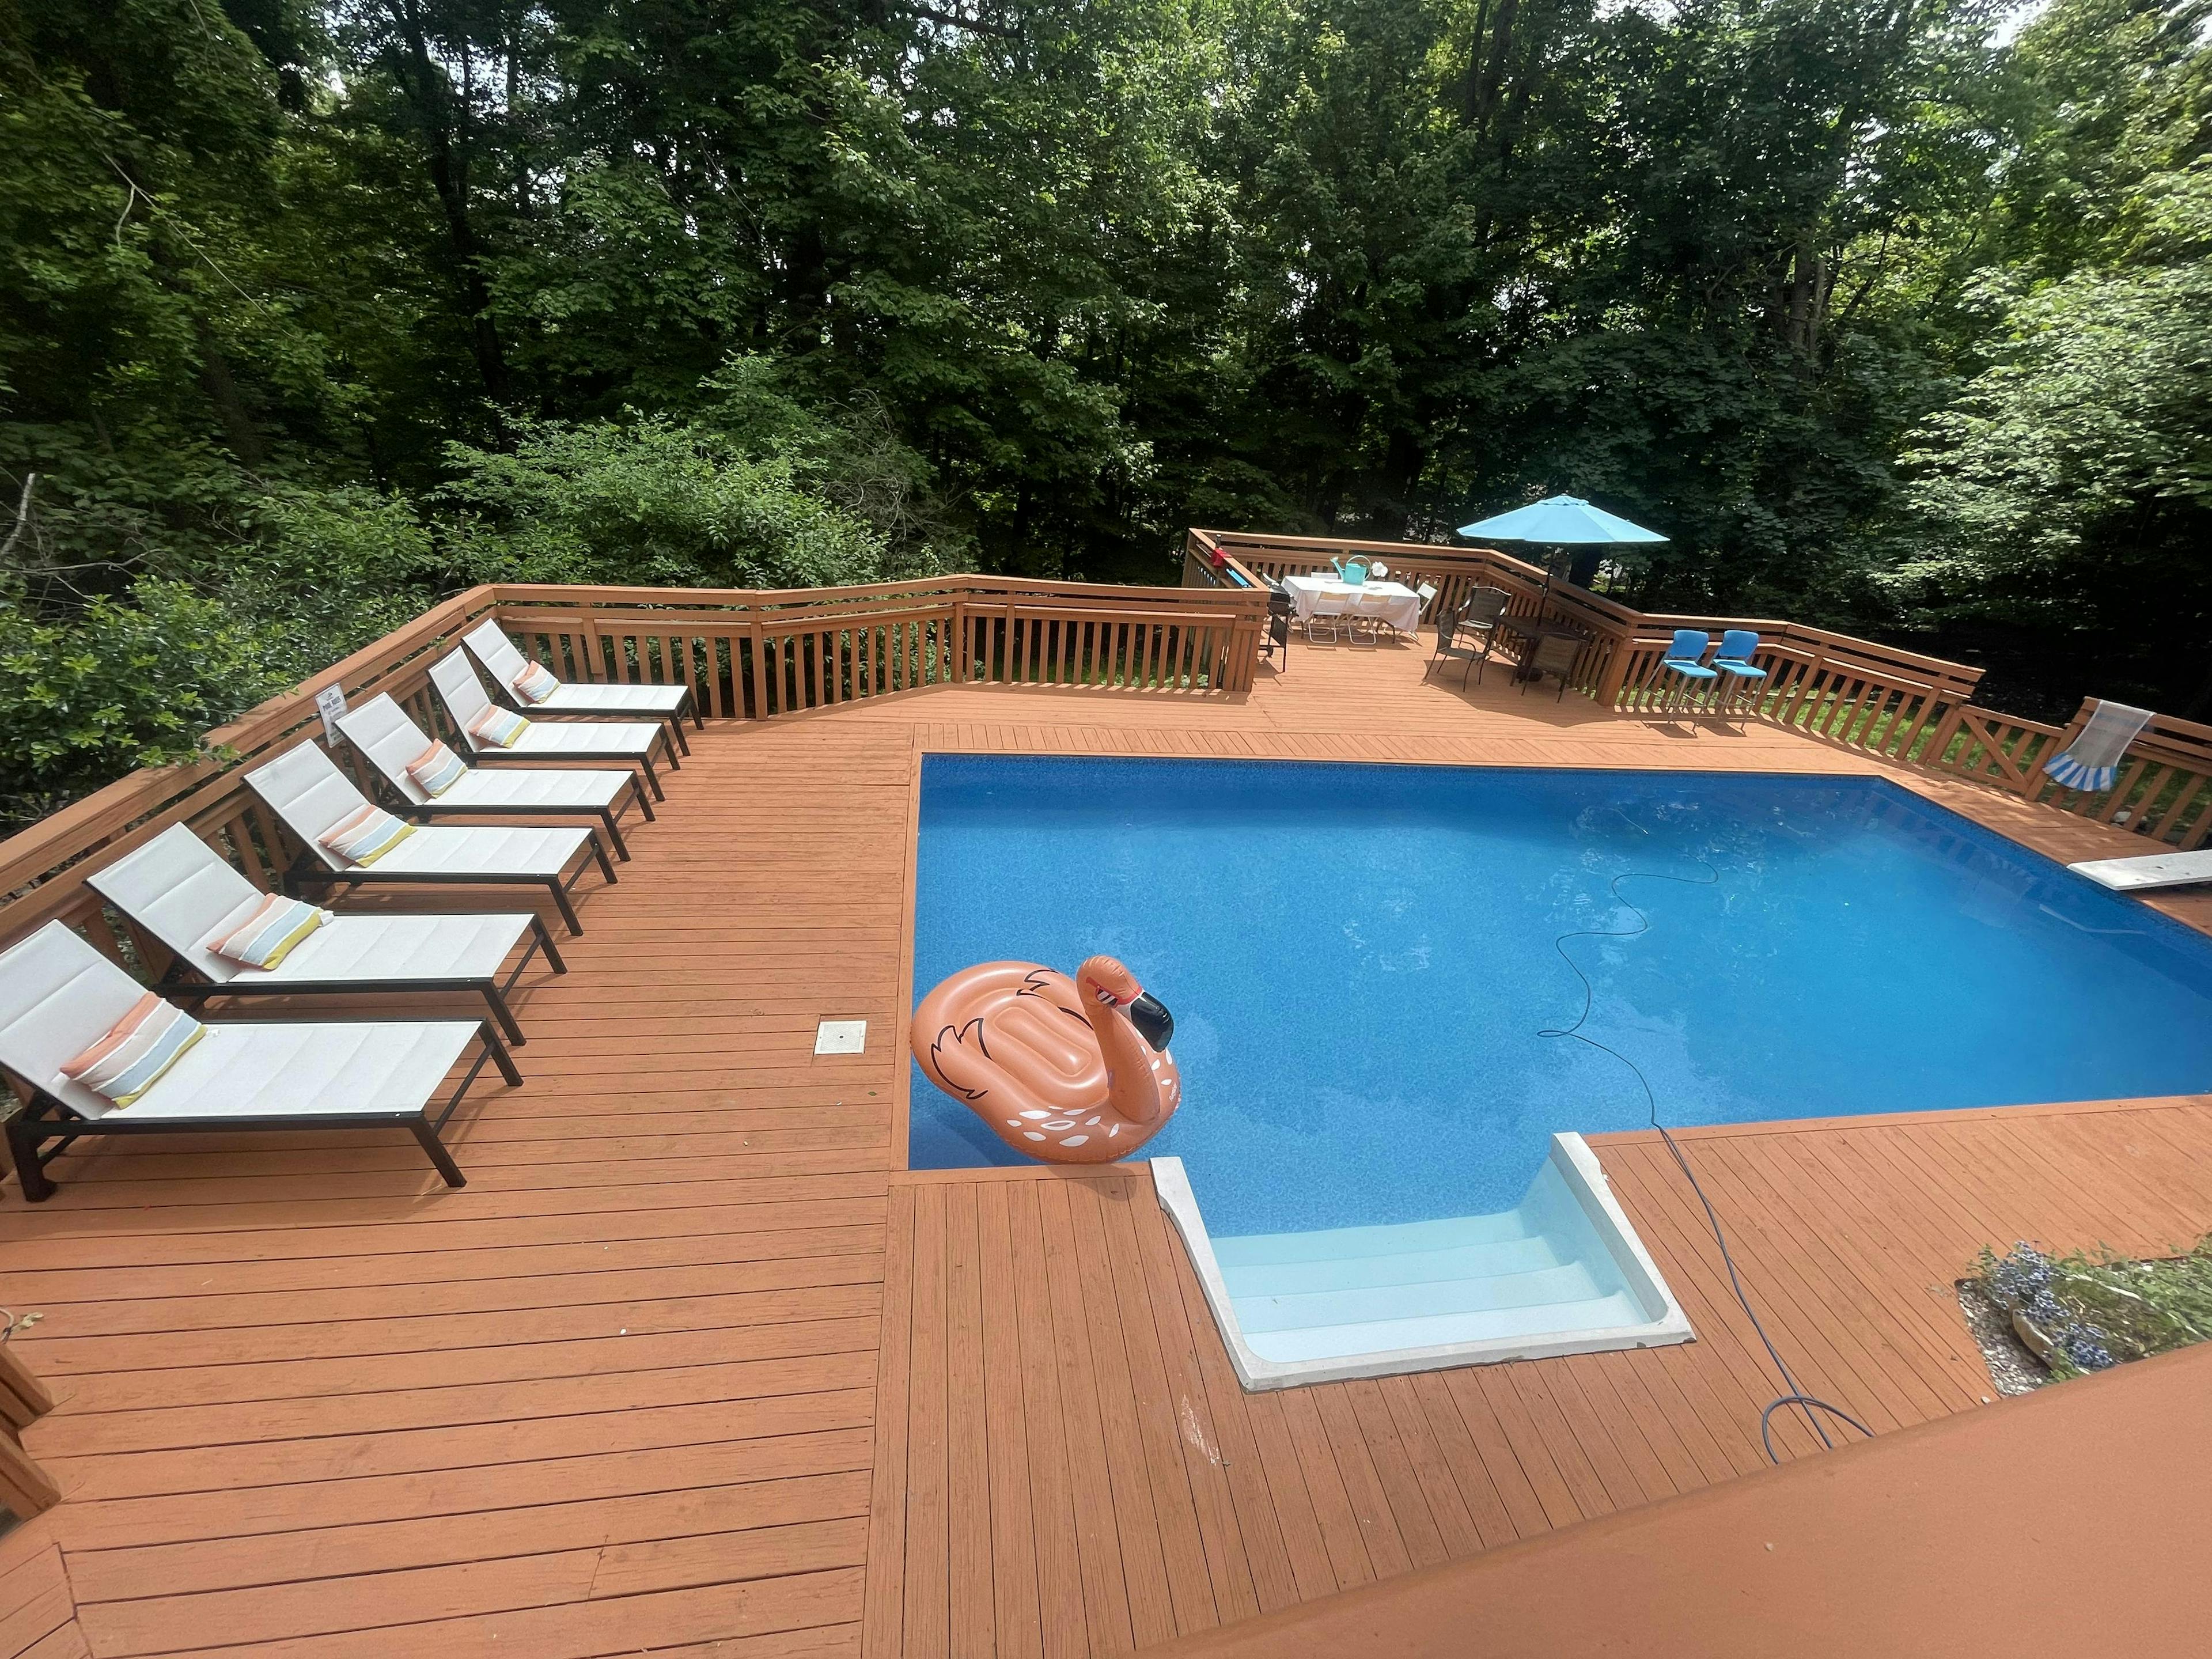 Private Pool Rental -10 % discount for Weekdays